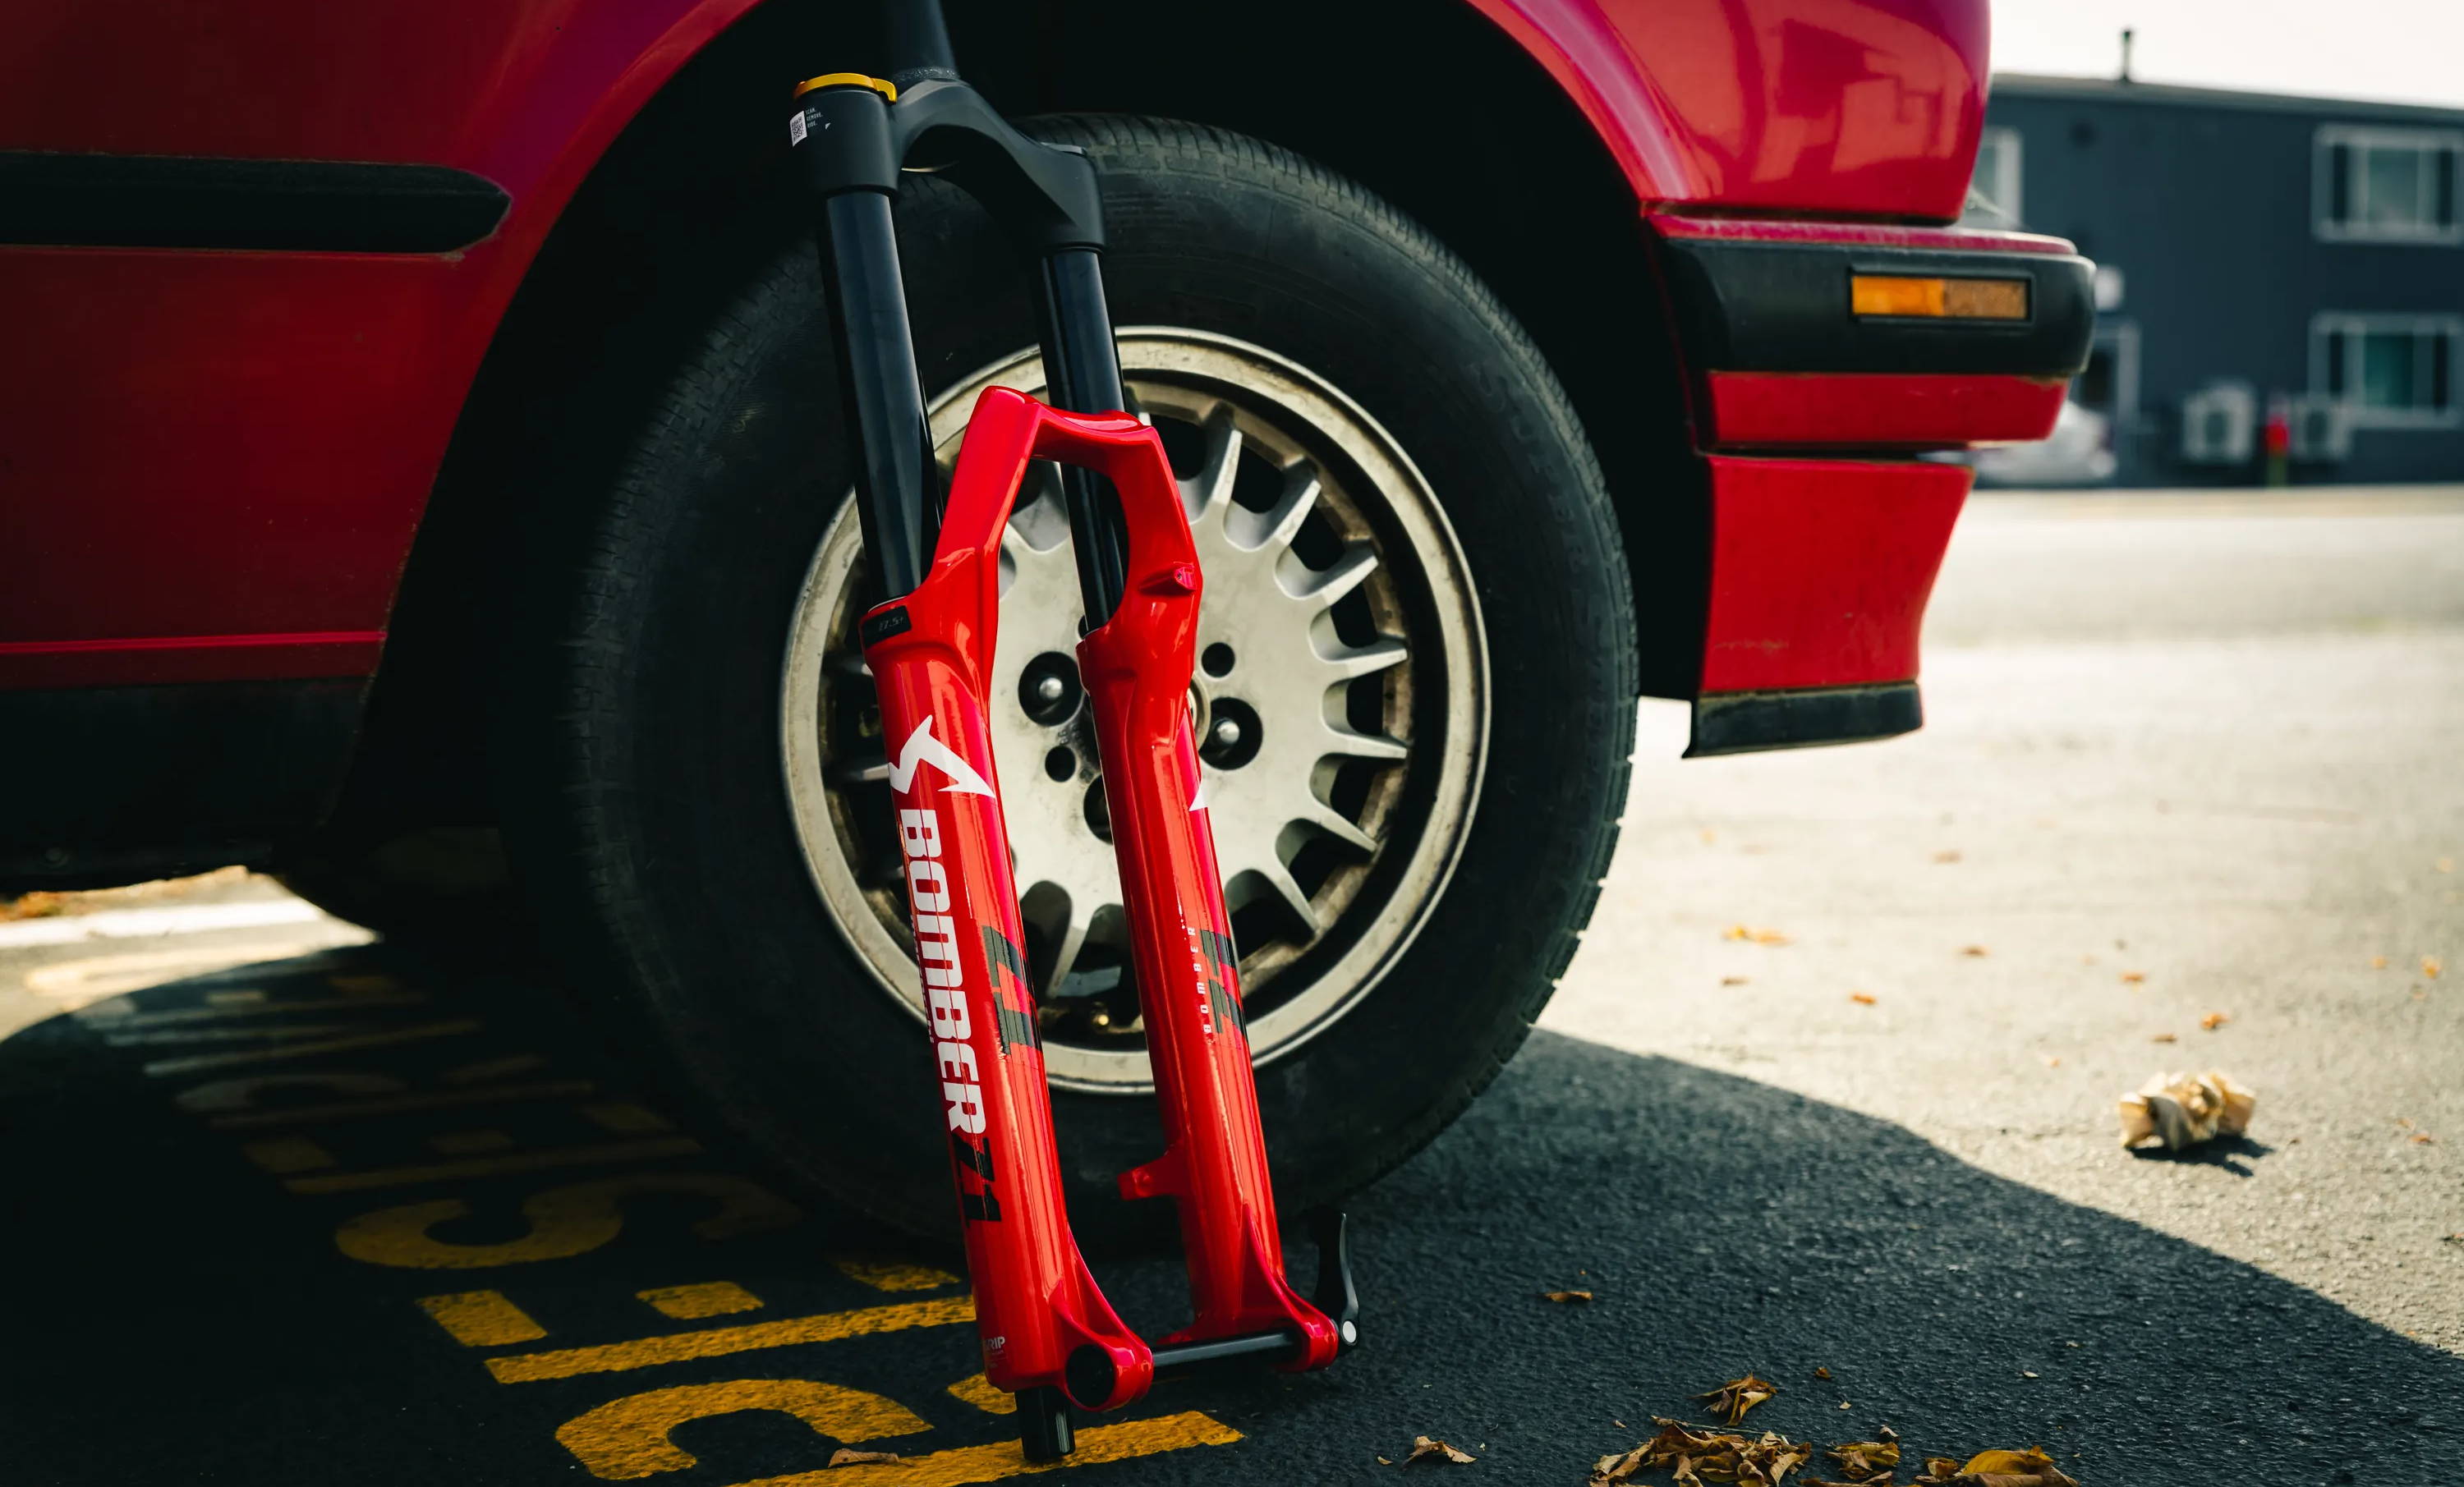 red marzocchi bomber z1 mountain bike fork leaning against a red bmw e30